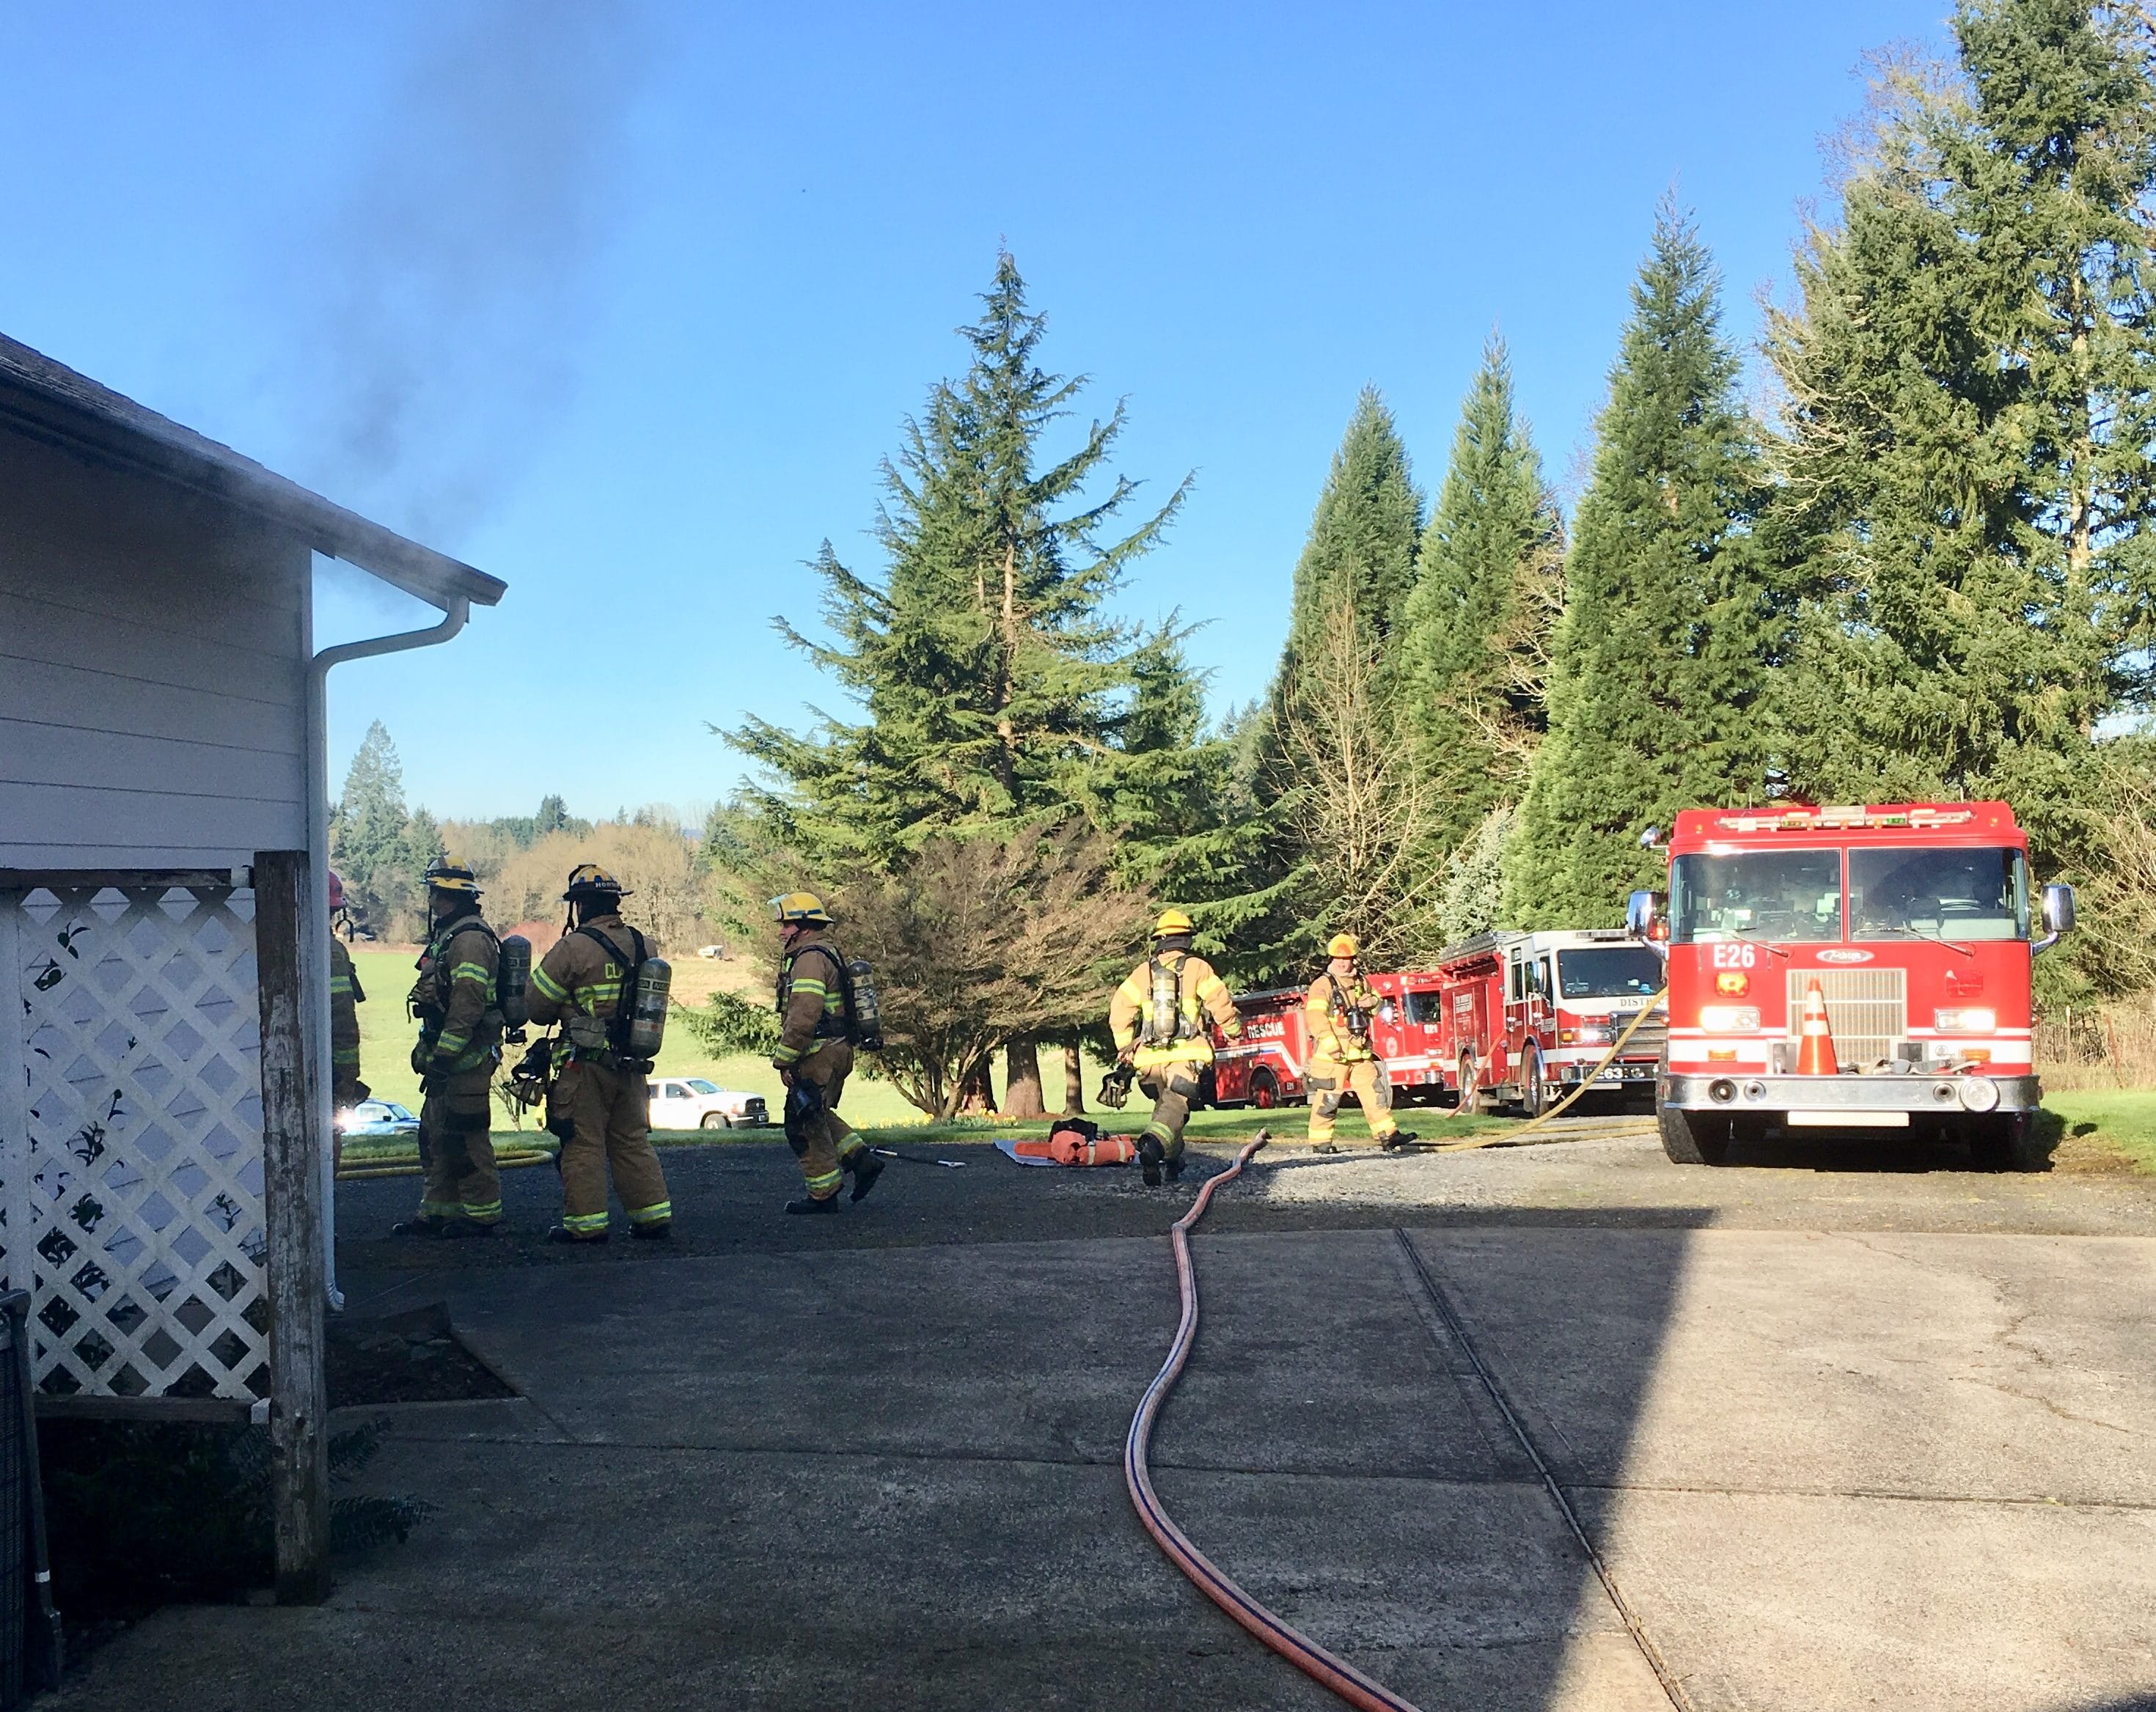 Firefighters work at the scene of a Ridgefield house fire Tuesday morning. The Clark County Fire Marshal is investigating the cause.